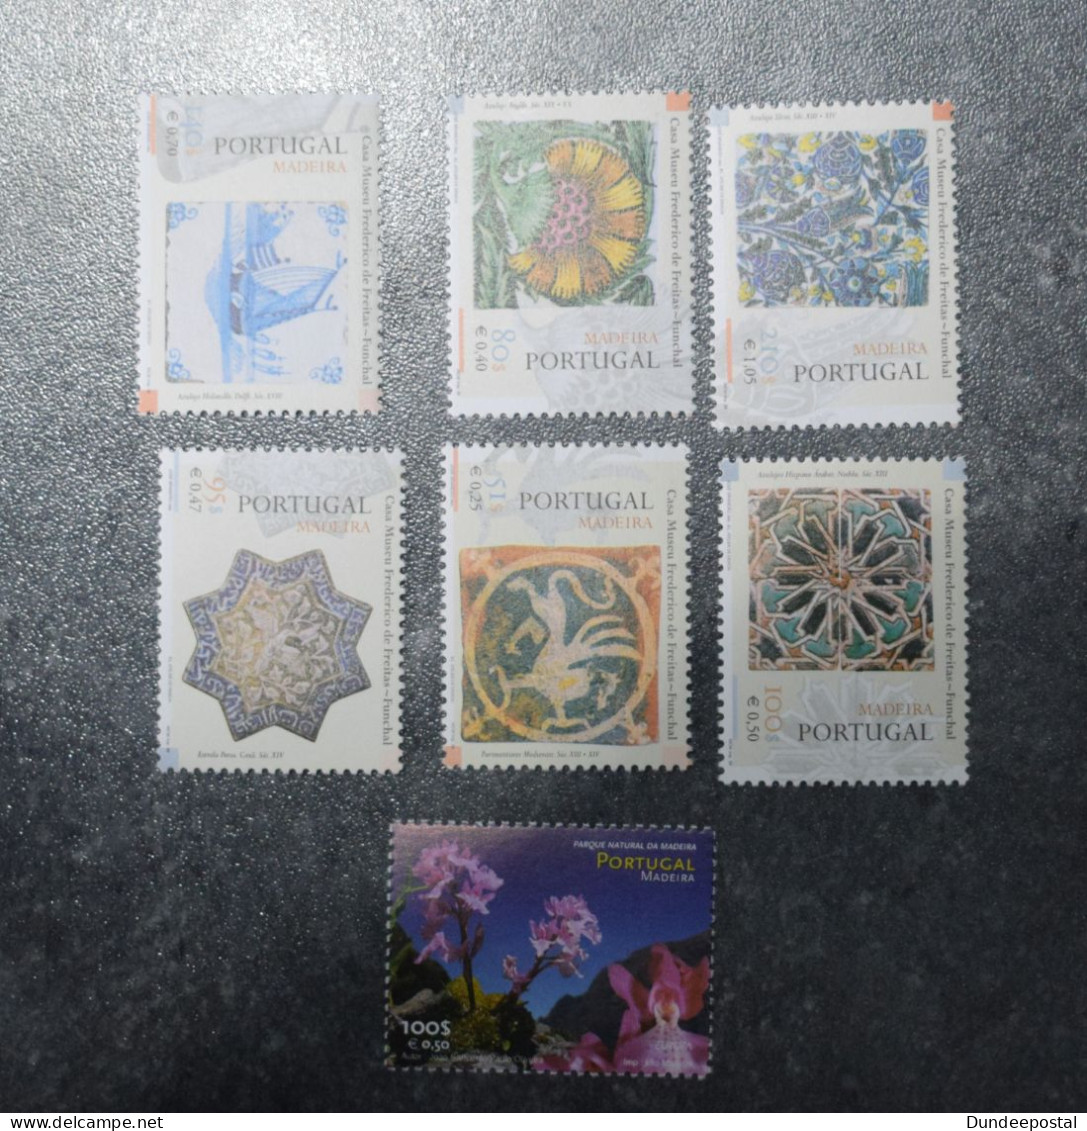 PORTUGAL STAMPS Madeira  Year Set 1999 MNH  ~~L@@K~~ - Madère